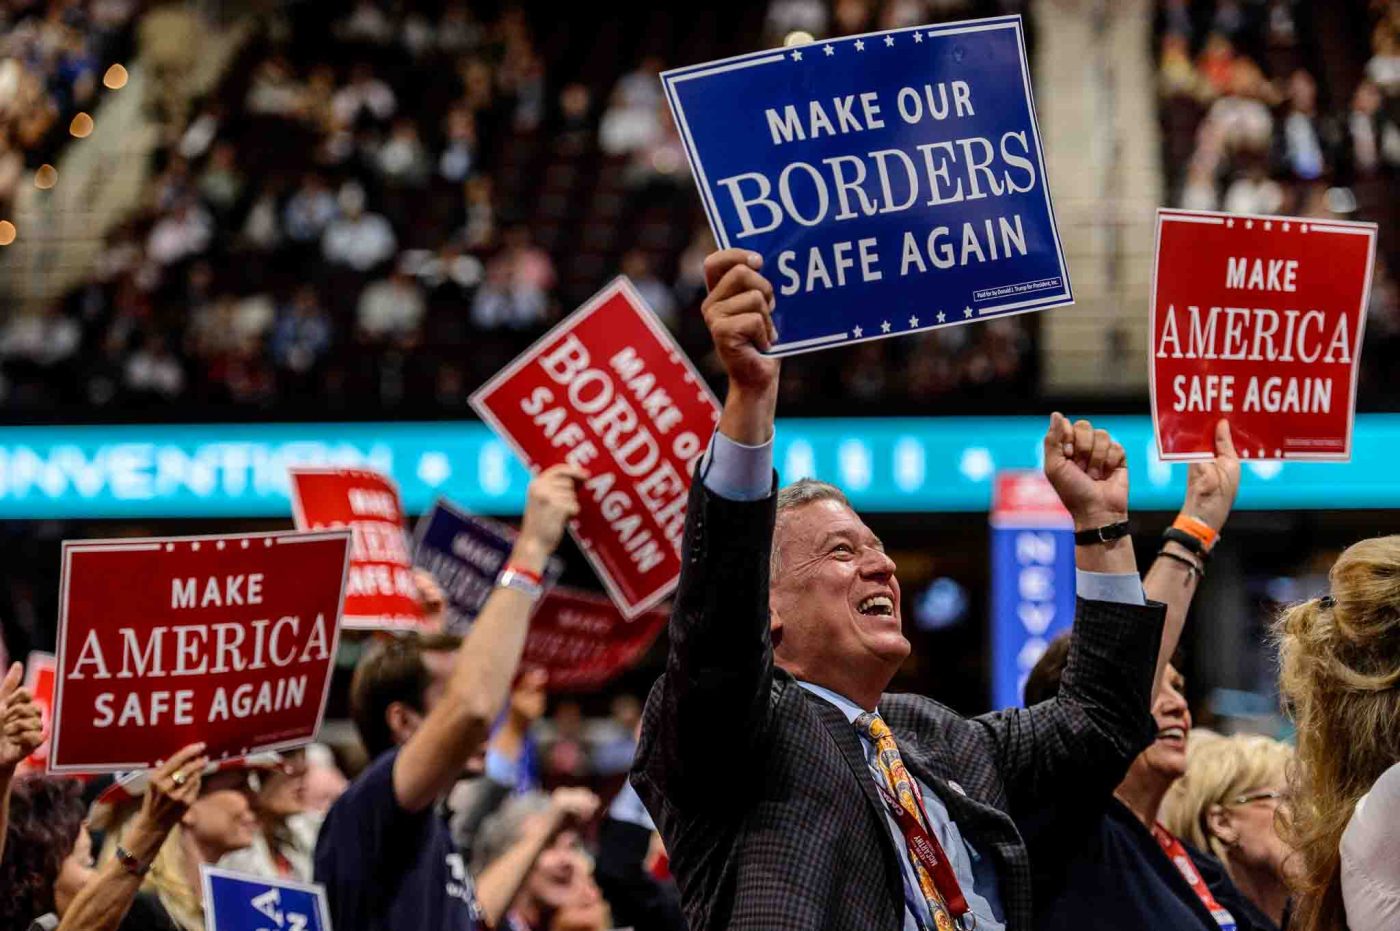 Make our borders safe again